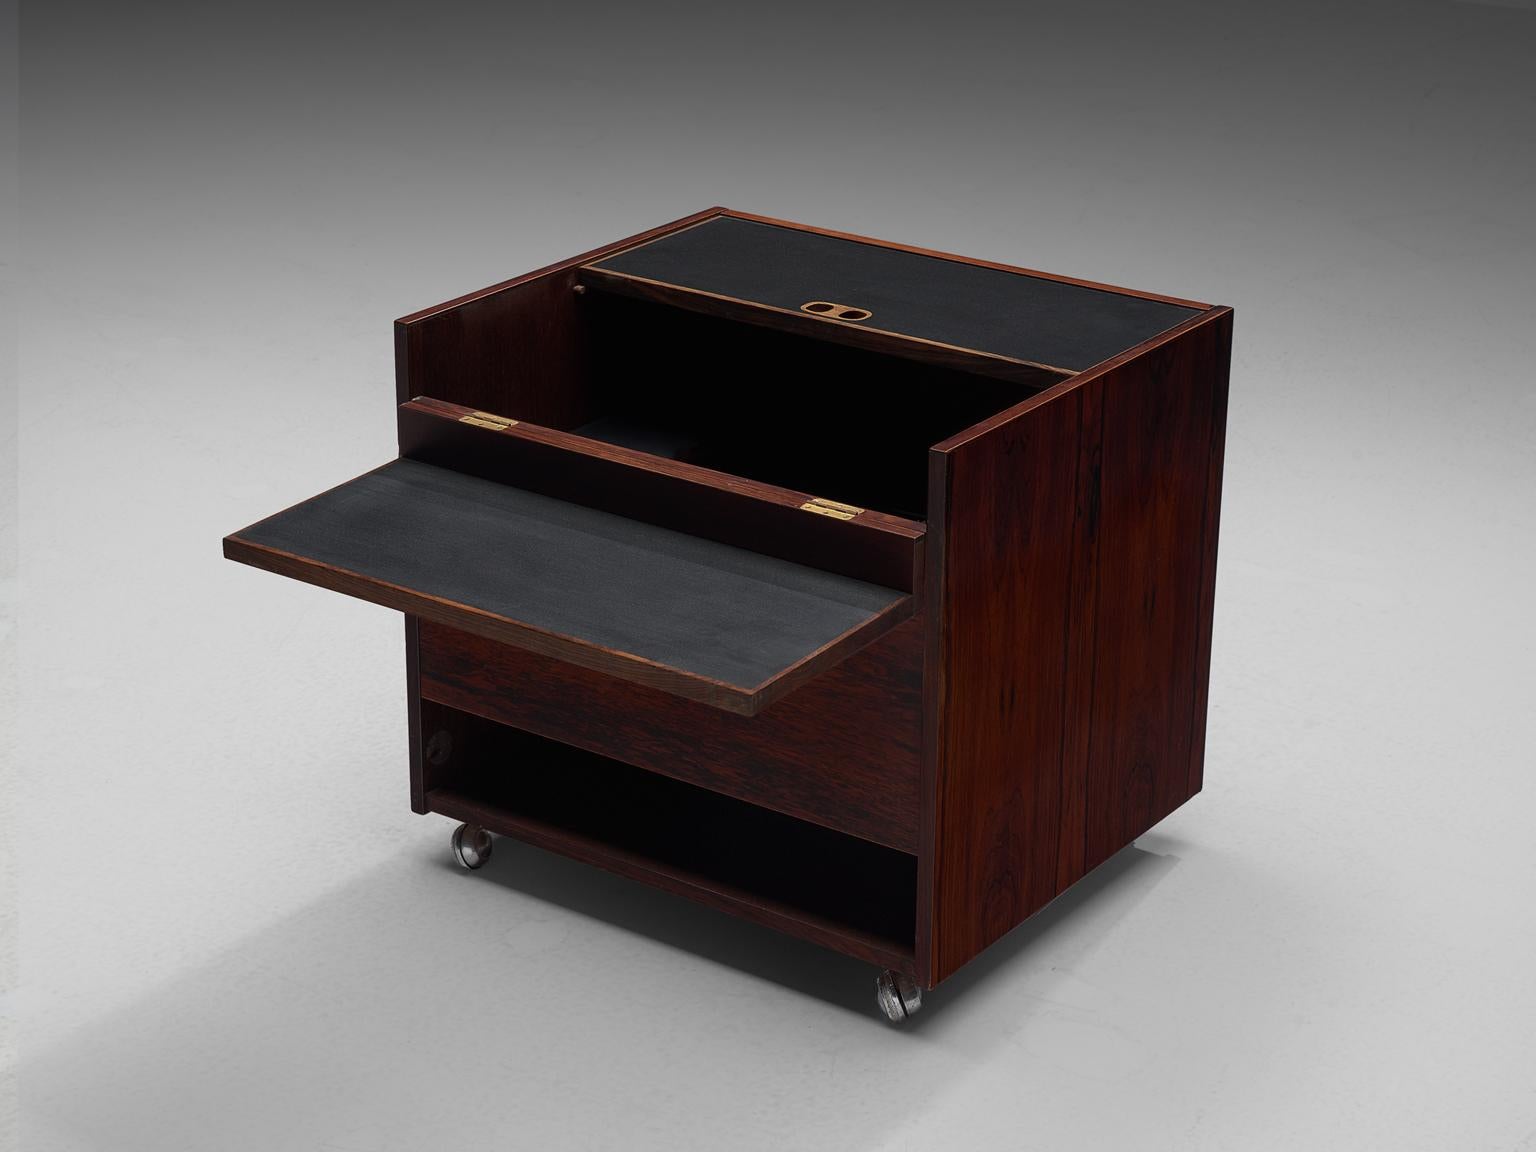 Dry bar, rosewood, Denmark, 1950s.

Luxury cube shaped dry bar in rosewood with interesting use of storage space.
The bar is also provided with a variety of stunning detail, such as the grips.